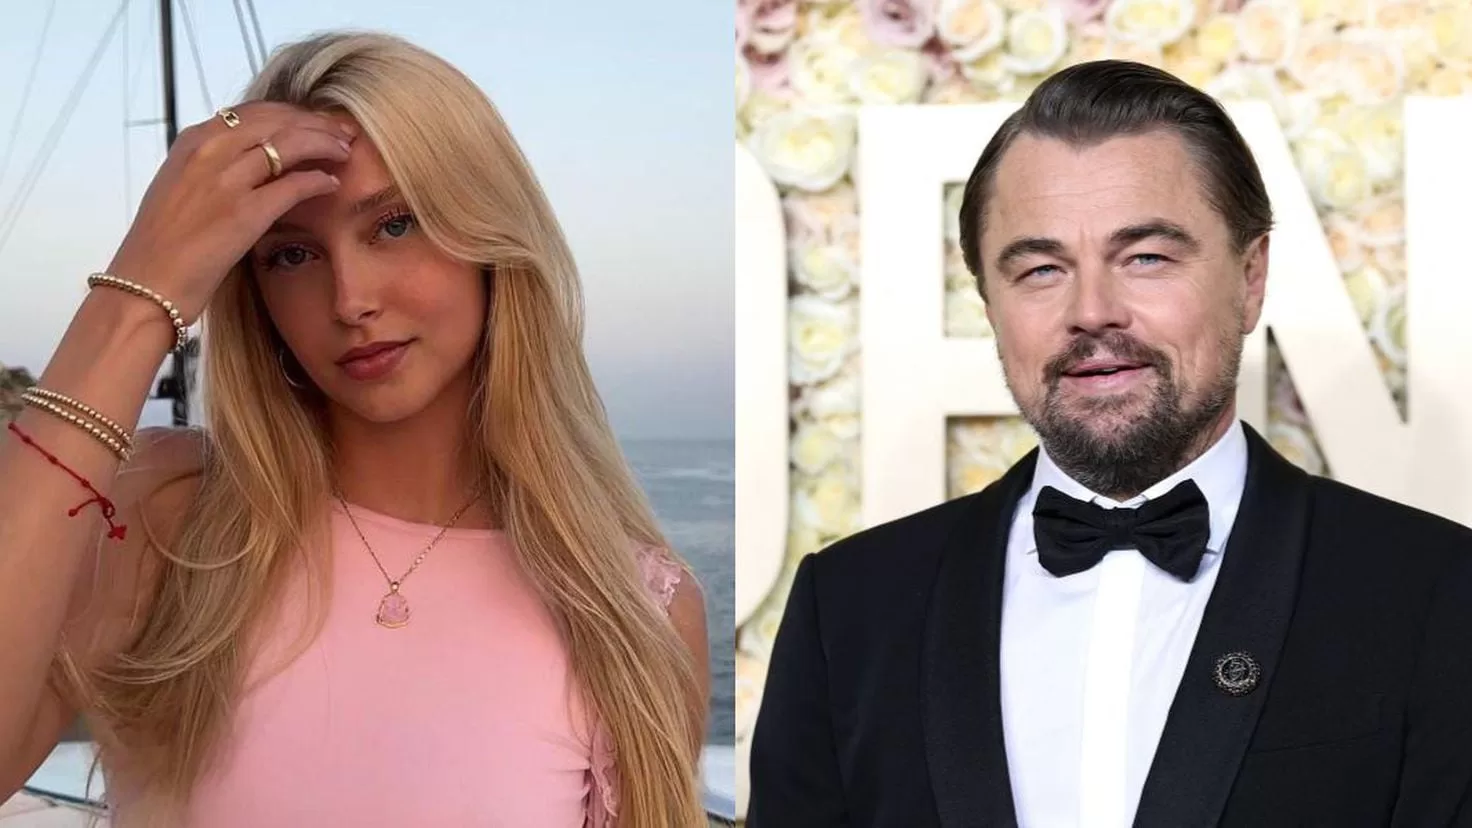 A Playboy model, on her meeting with Leonardo DiCaprio: Too weird and old
